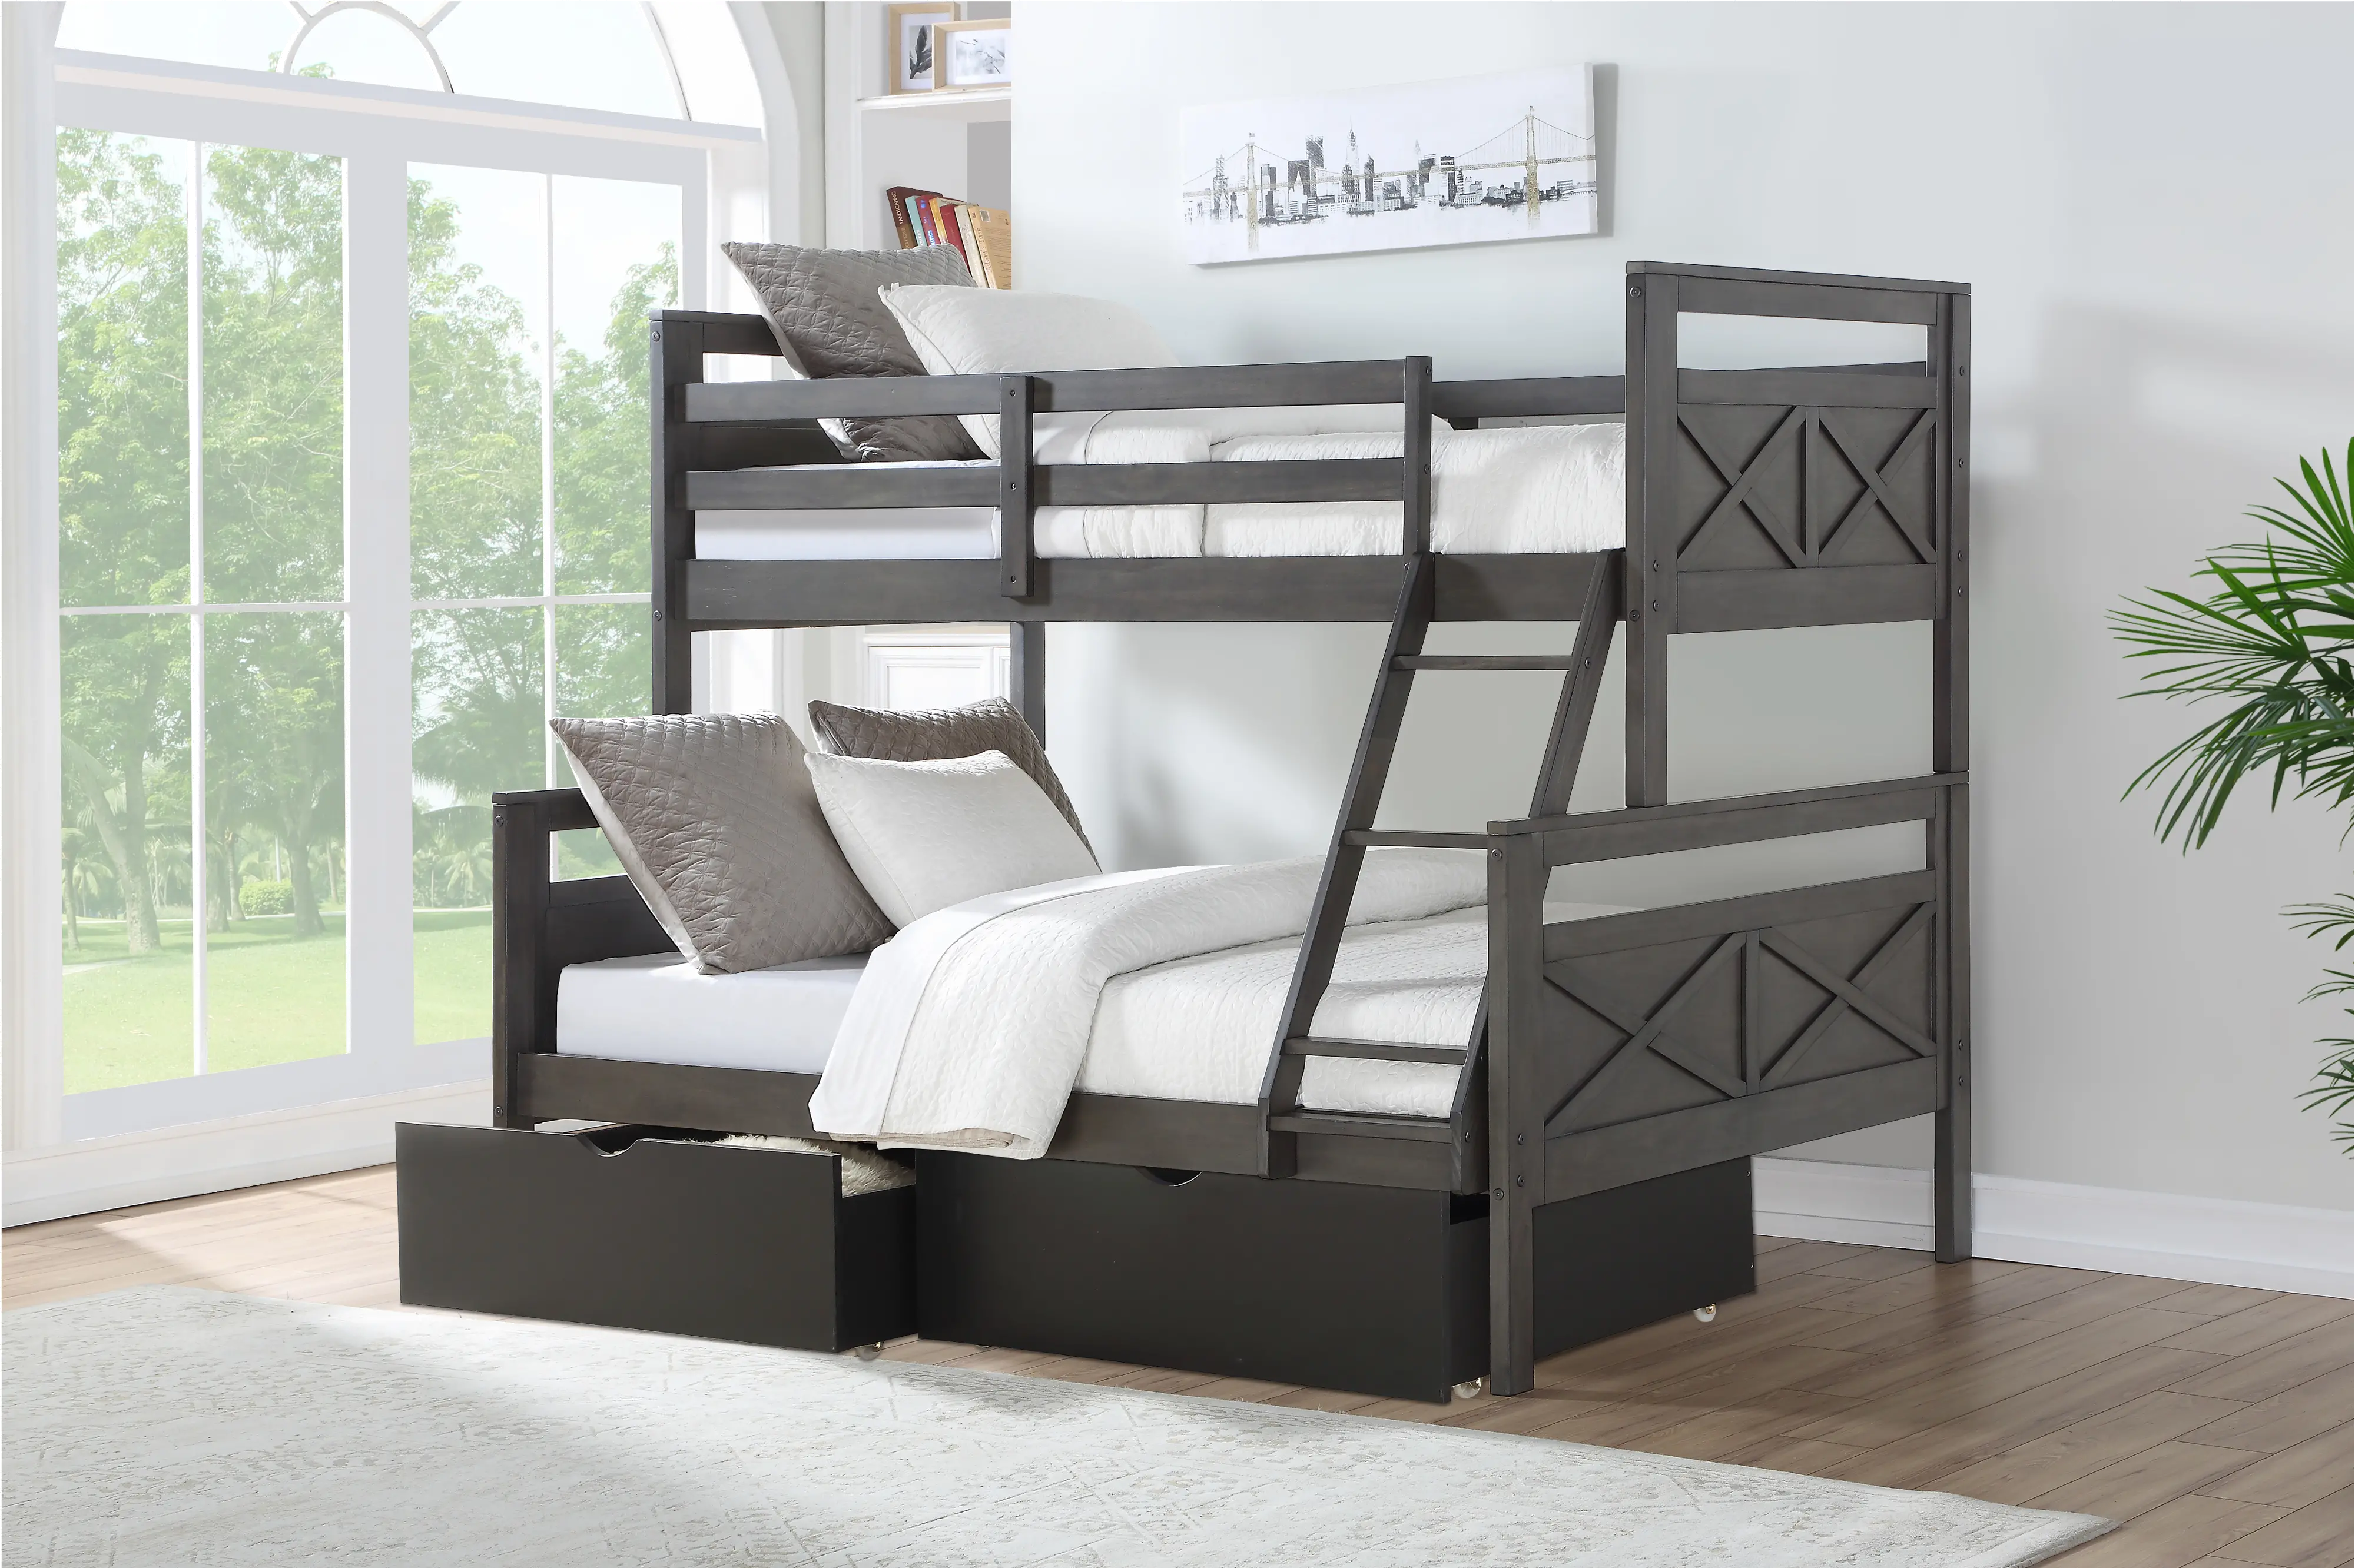 Rustic Gray Twin over Full Bunk Bed with Storage Drawers